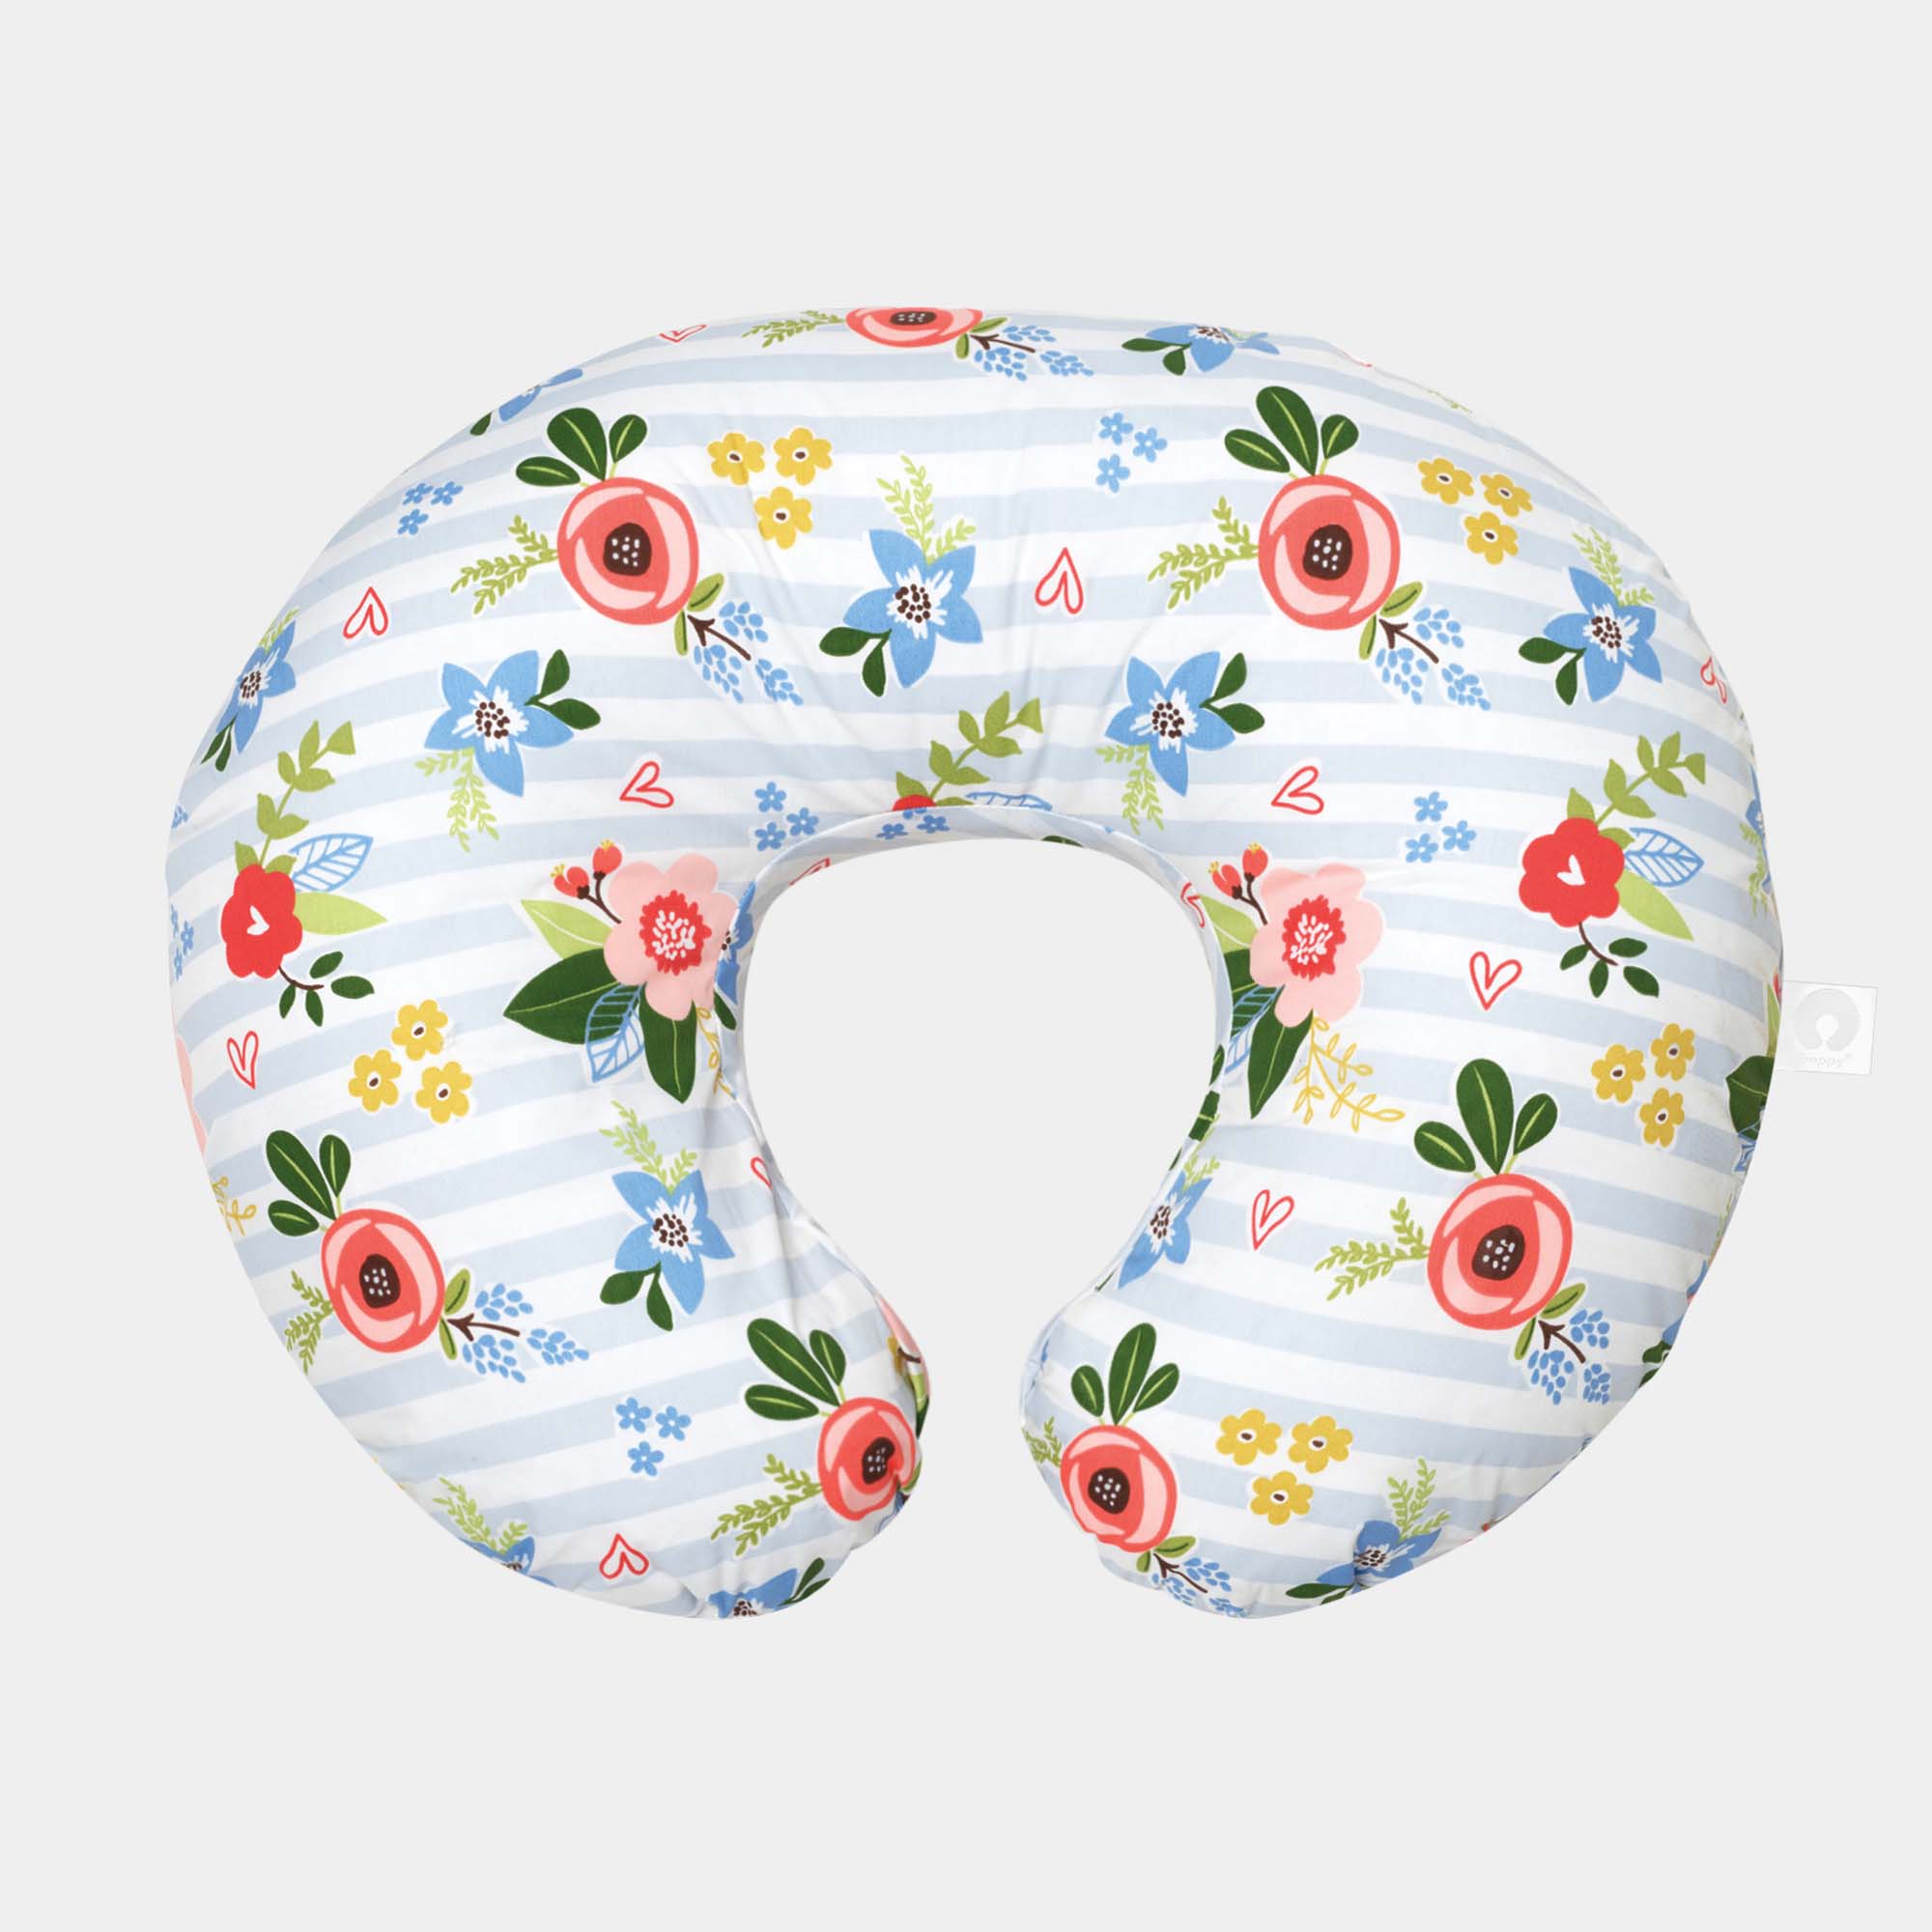  TL Care Nursing Pads Made with Organic Cotton